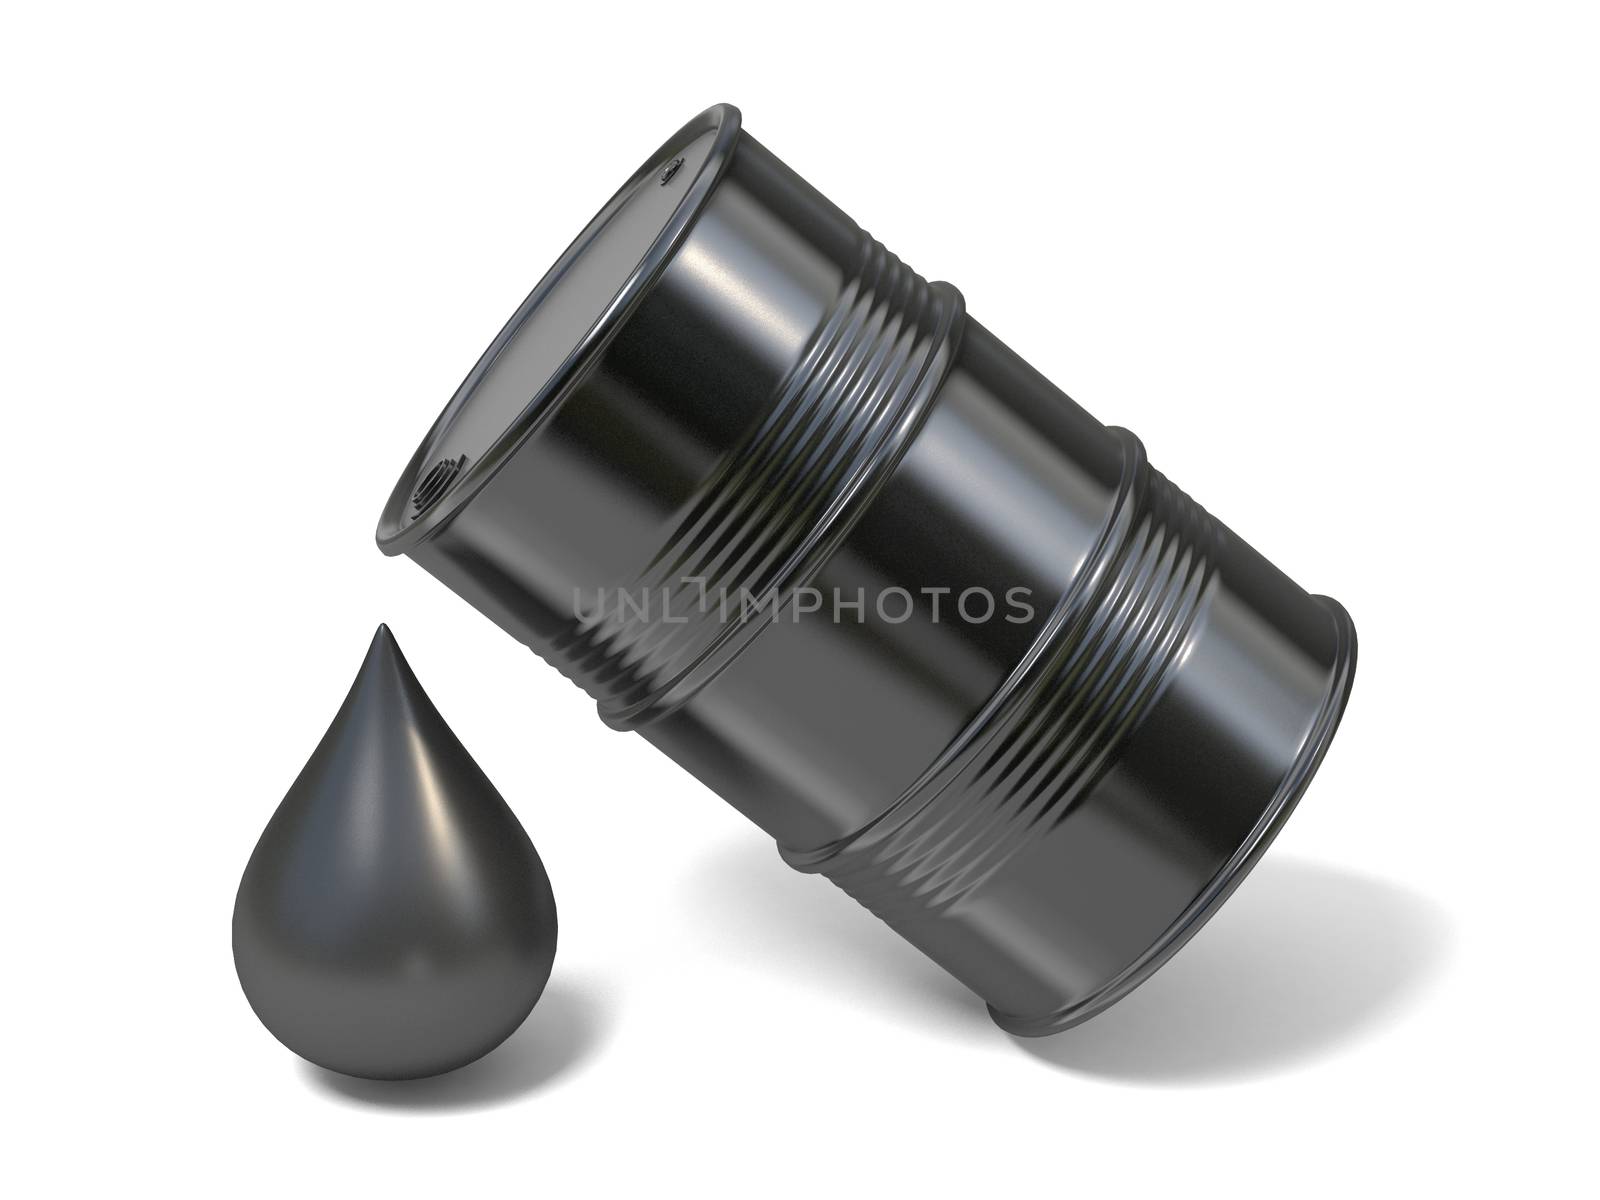 Black barrel and giant oil drop icon 3D render illustration isolated on white background